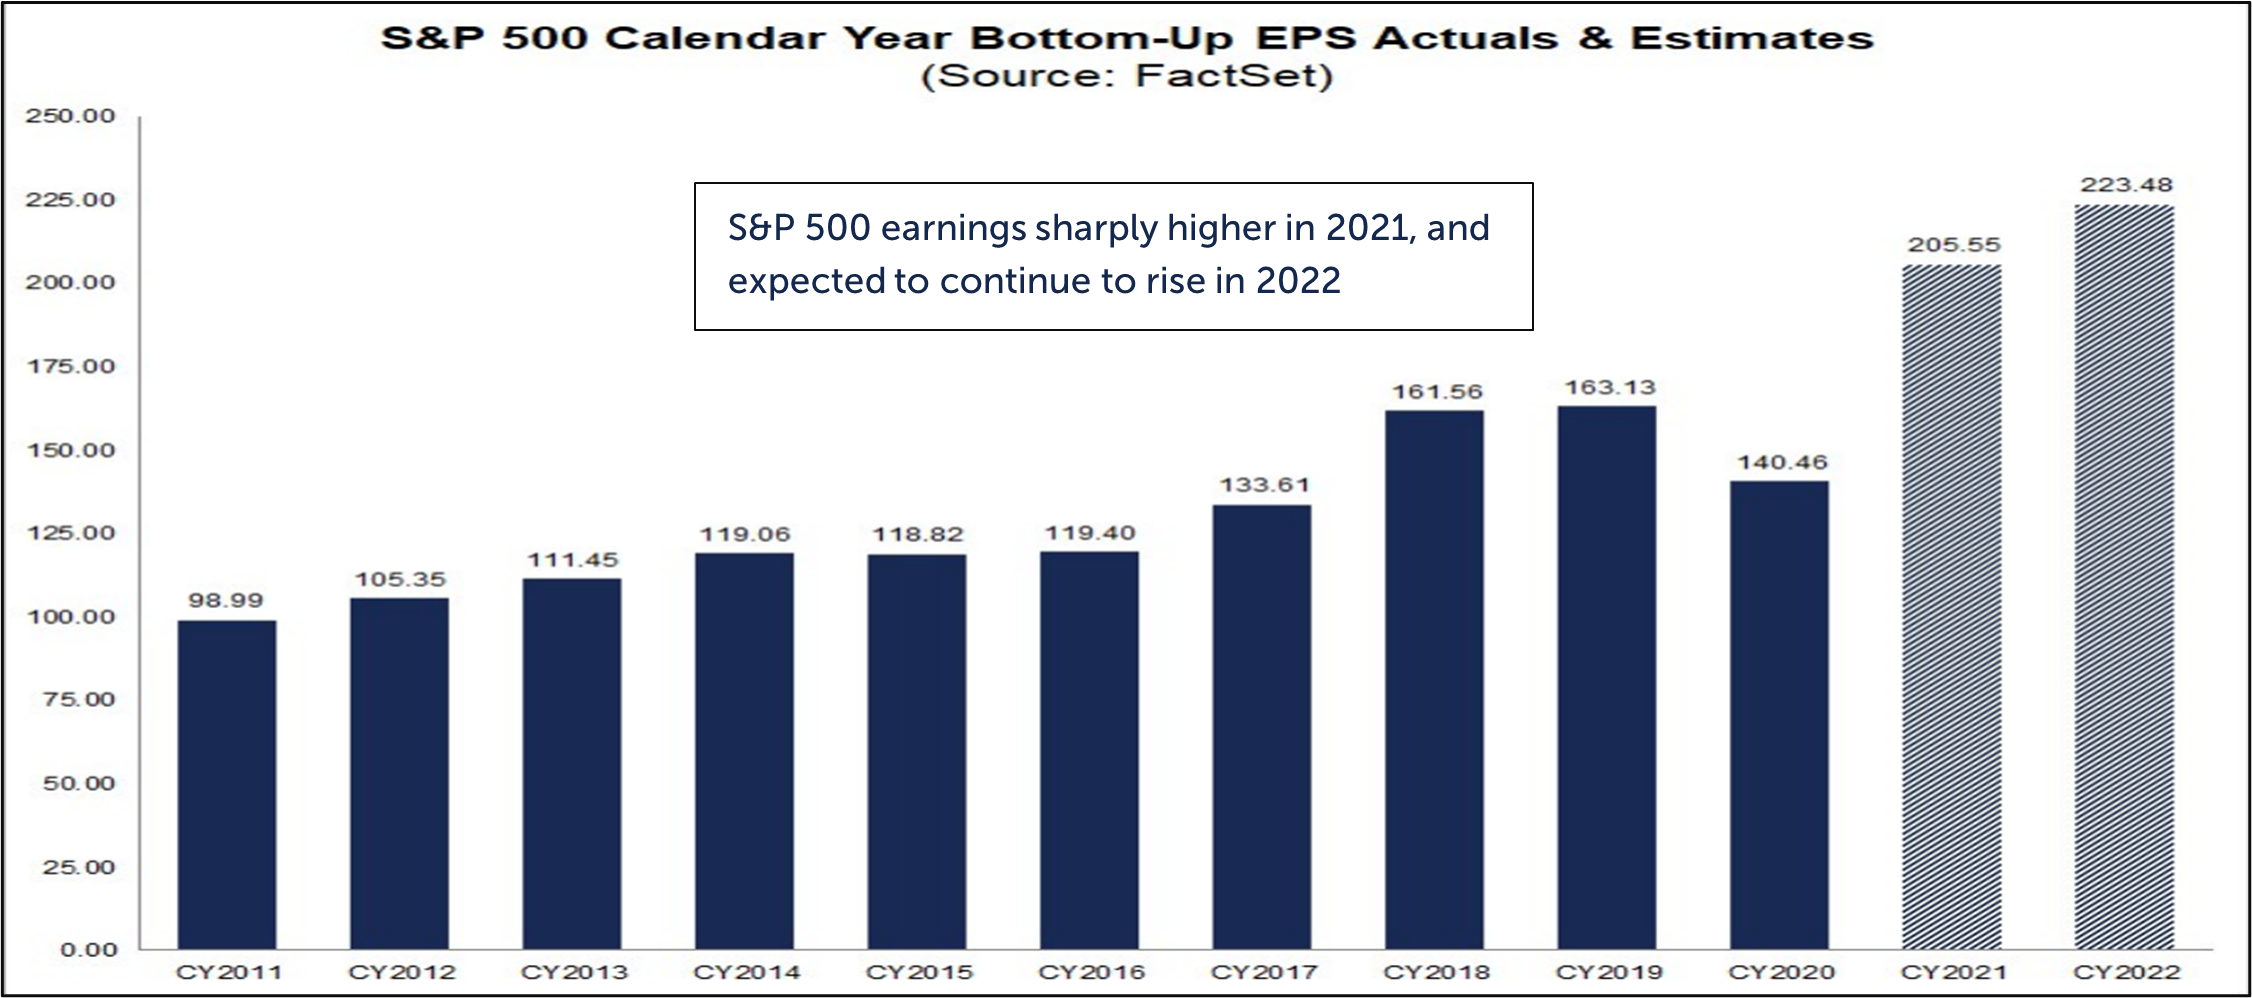 Bar graph depicting S&P 500 Calendar Year Bottom-Up EPS Actuals & Estimates from CY2011 to CY2022 with text reading: S&P 500 earnings sharply higher in 2021, and expected to continue to rise in 2022